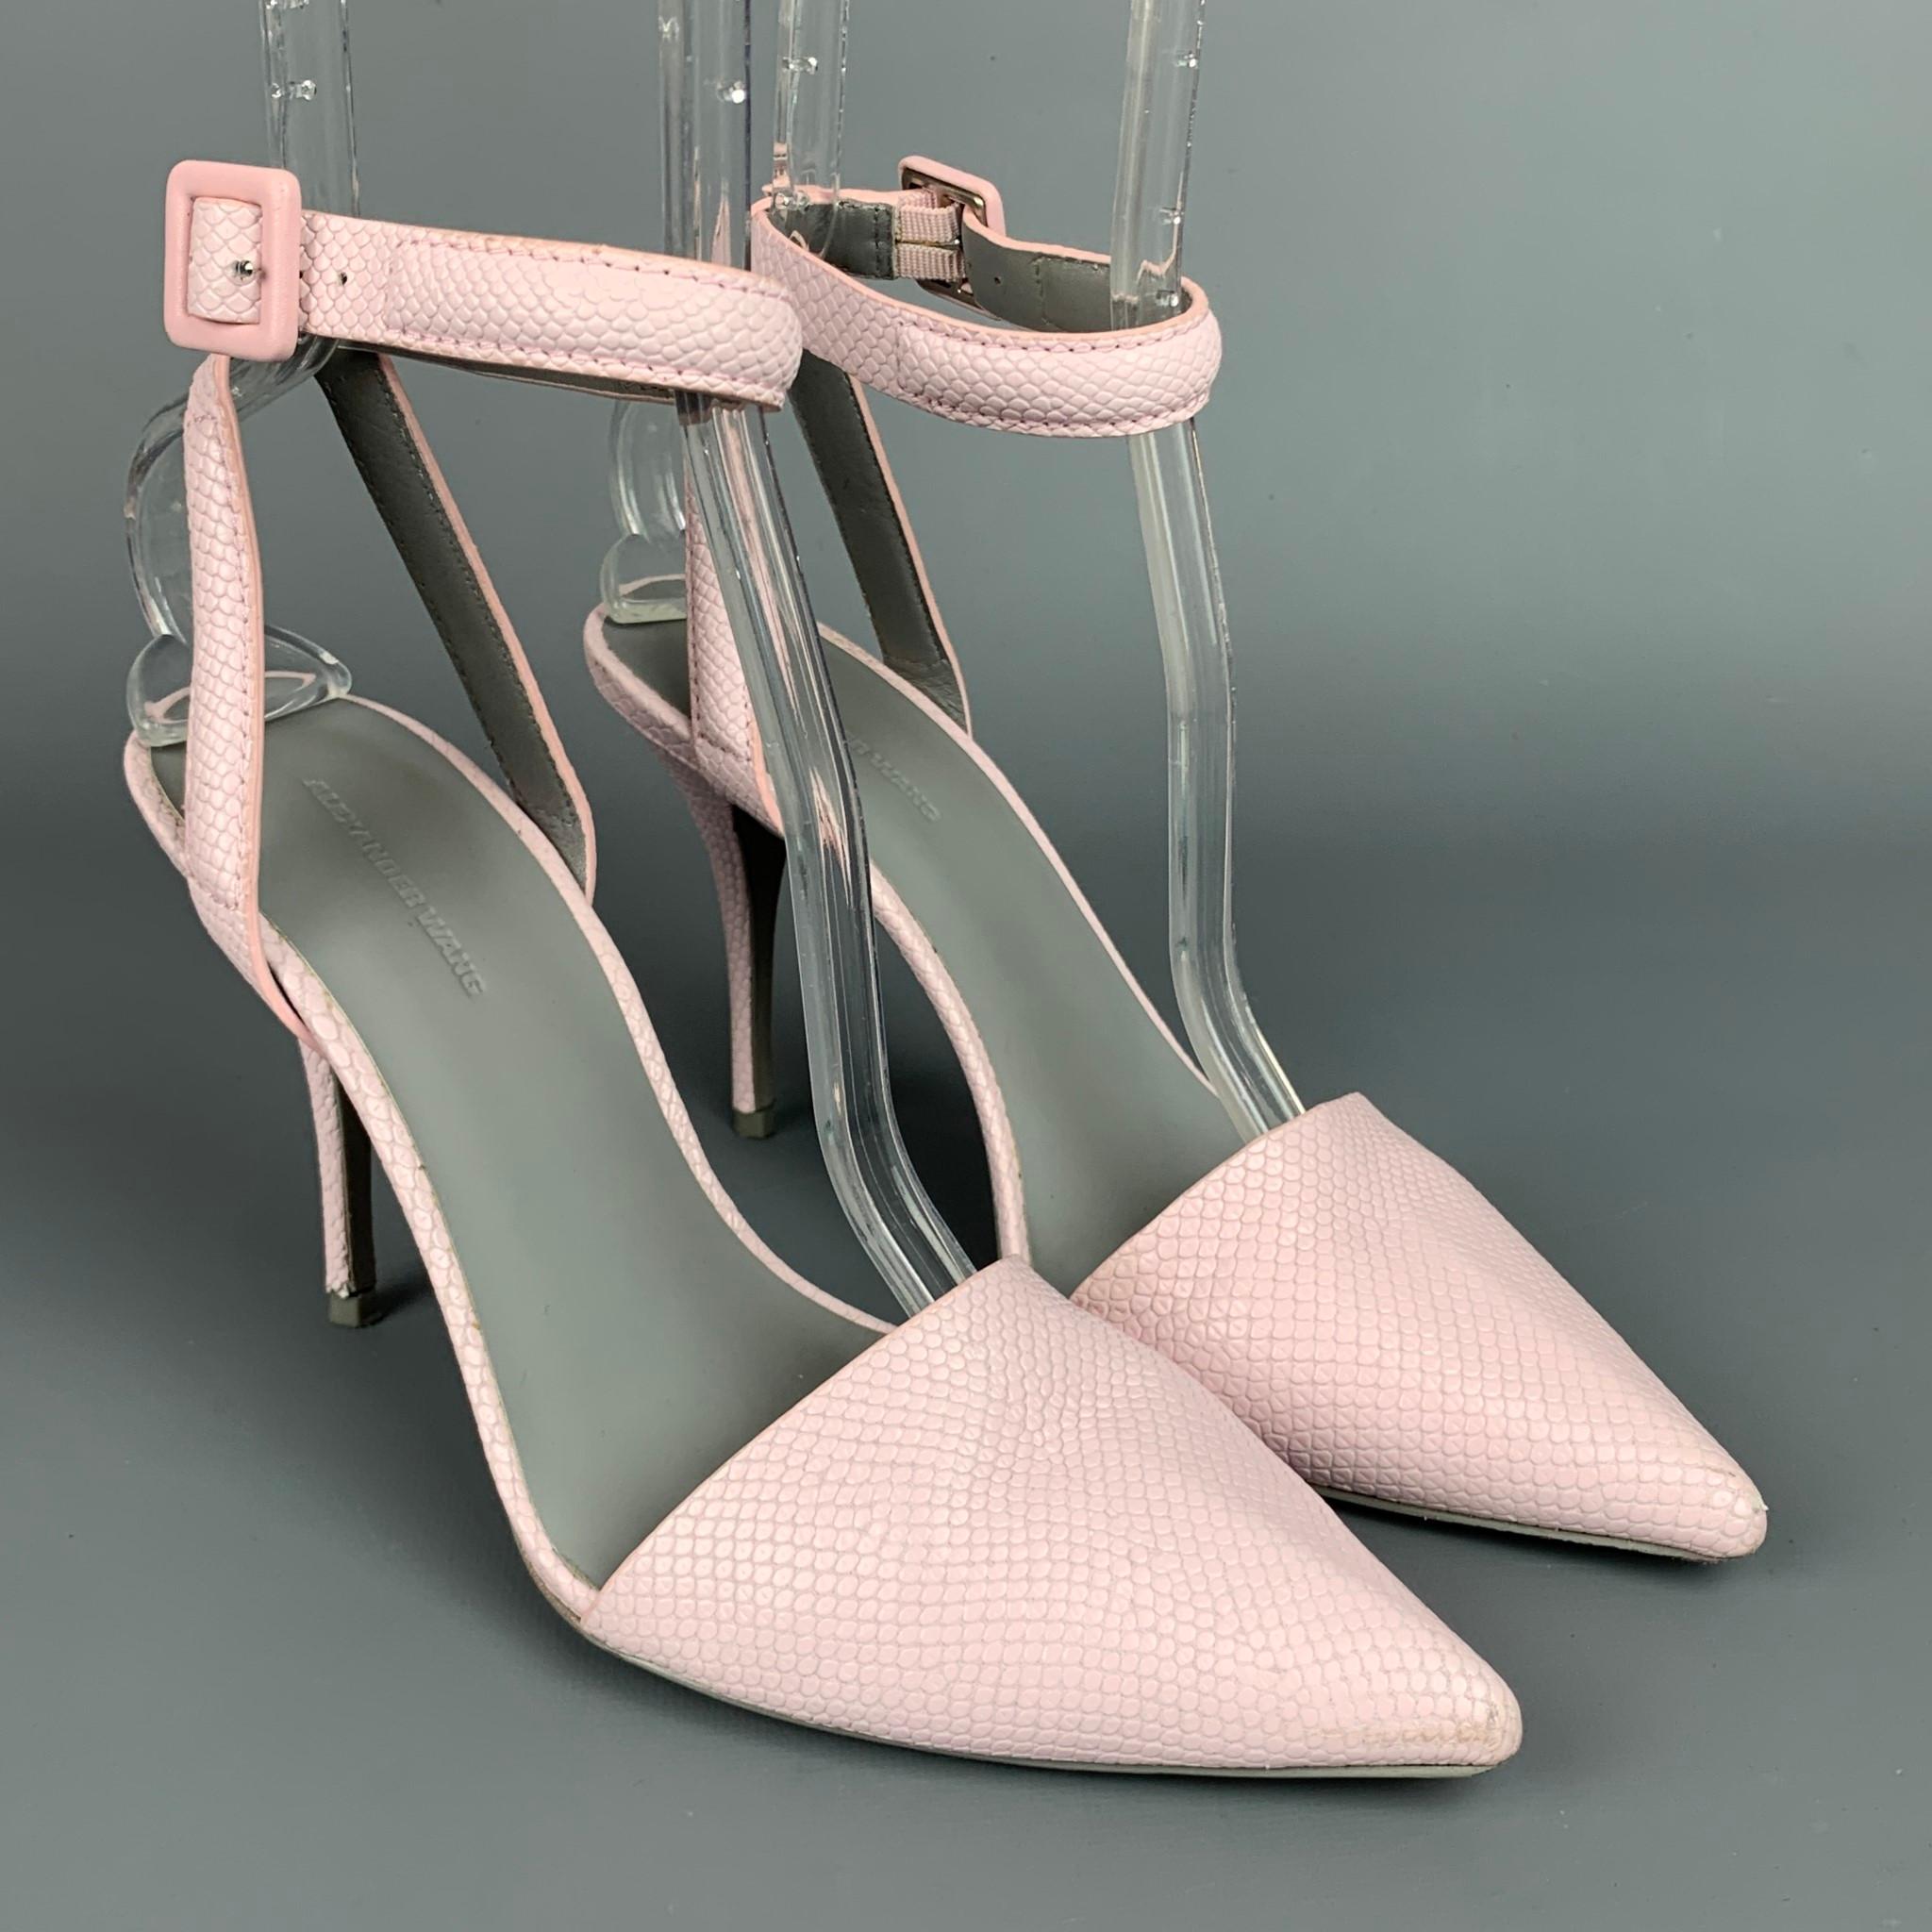 ALEXANDER WANG pumps comes in a lilac embossed leather featuring a pointed toe, ankle strap, wooden sole, and a stacked heel. 

Very Good Pre-Owned Condition. Moderate scruff at toe.
Marked: 38
Original Retail Price: $420.00

Measurements:

Heel: 4